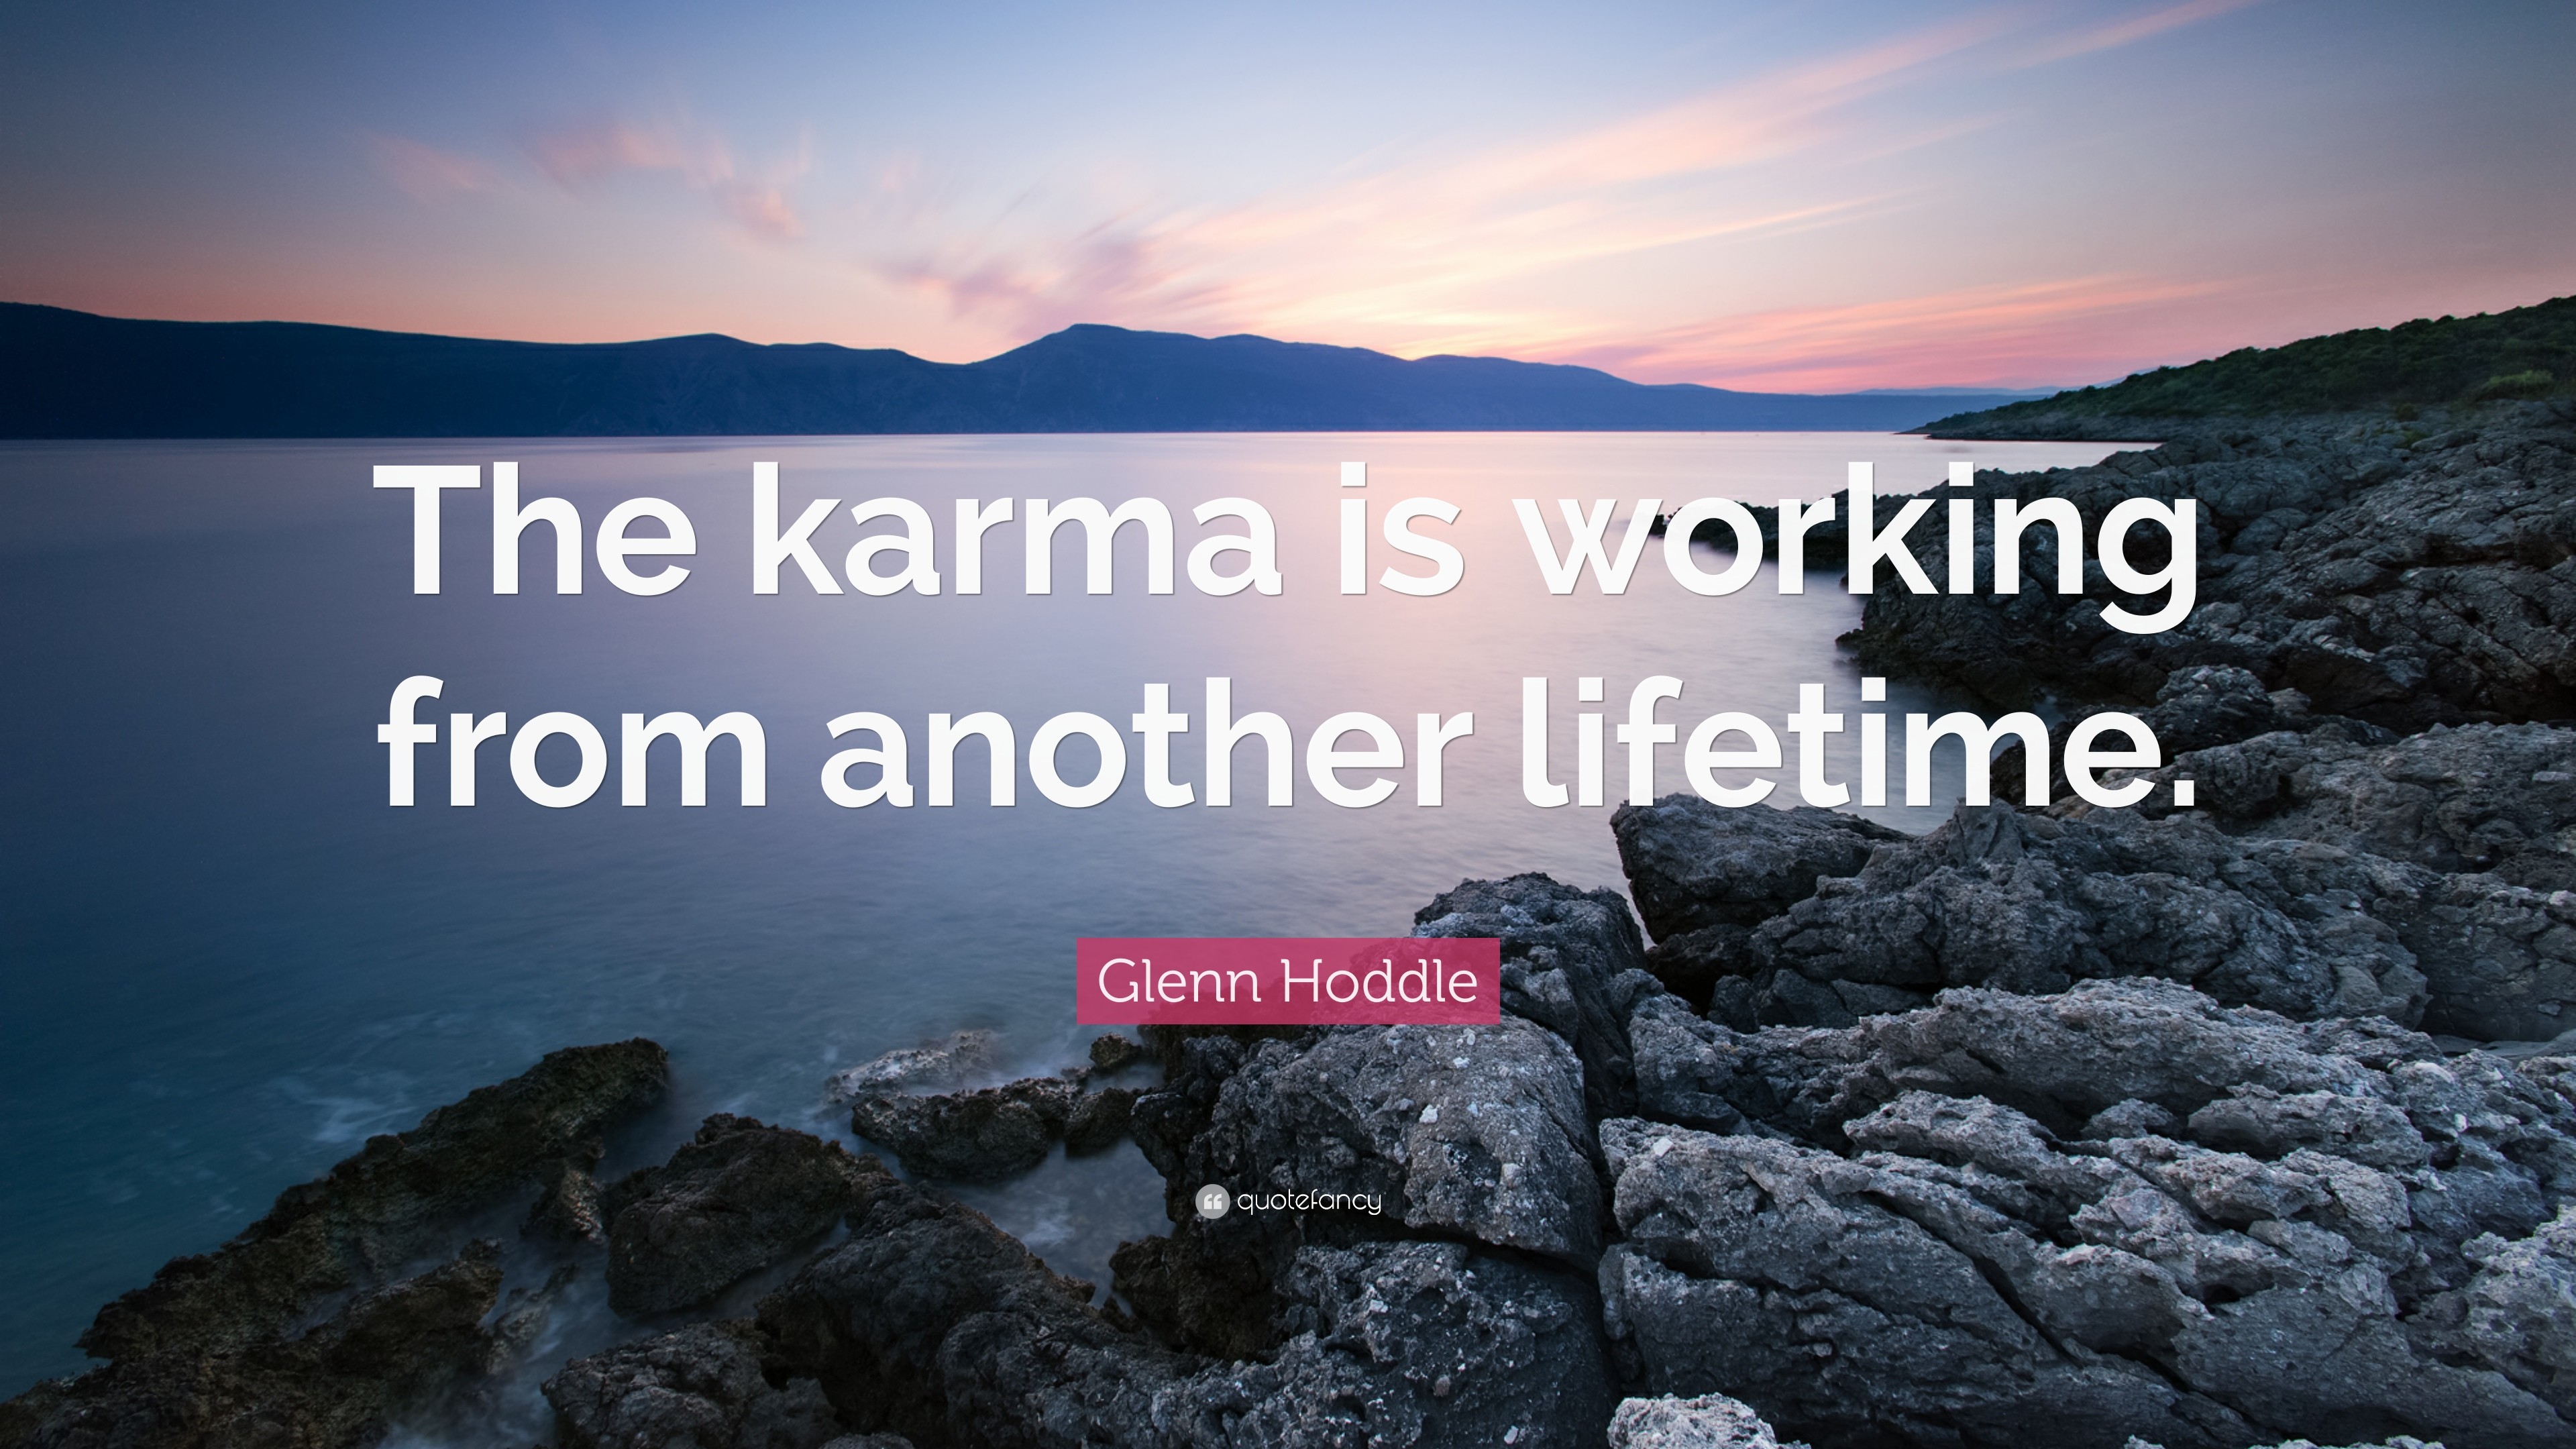 3840x2160 Glenn Hoddle Quote: “The karma is working from another lifetime.”